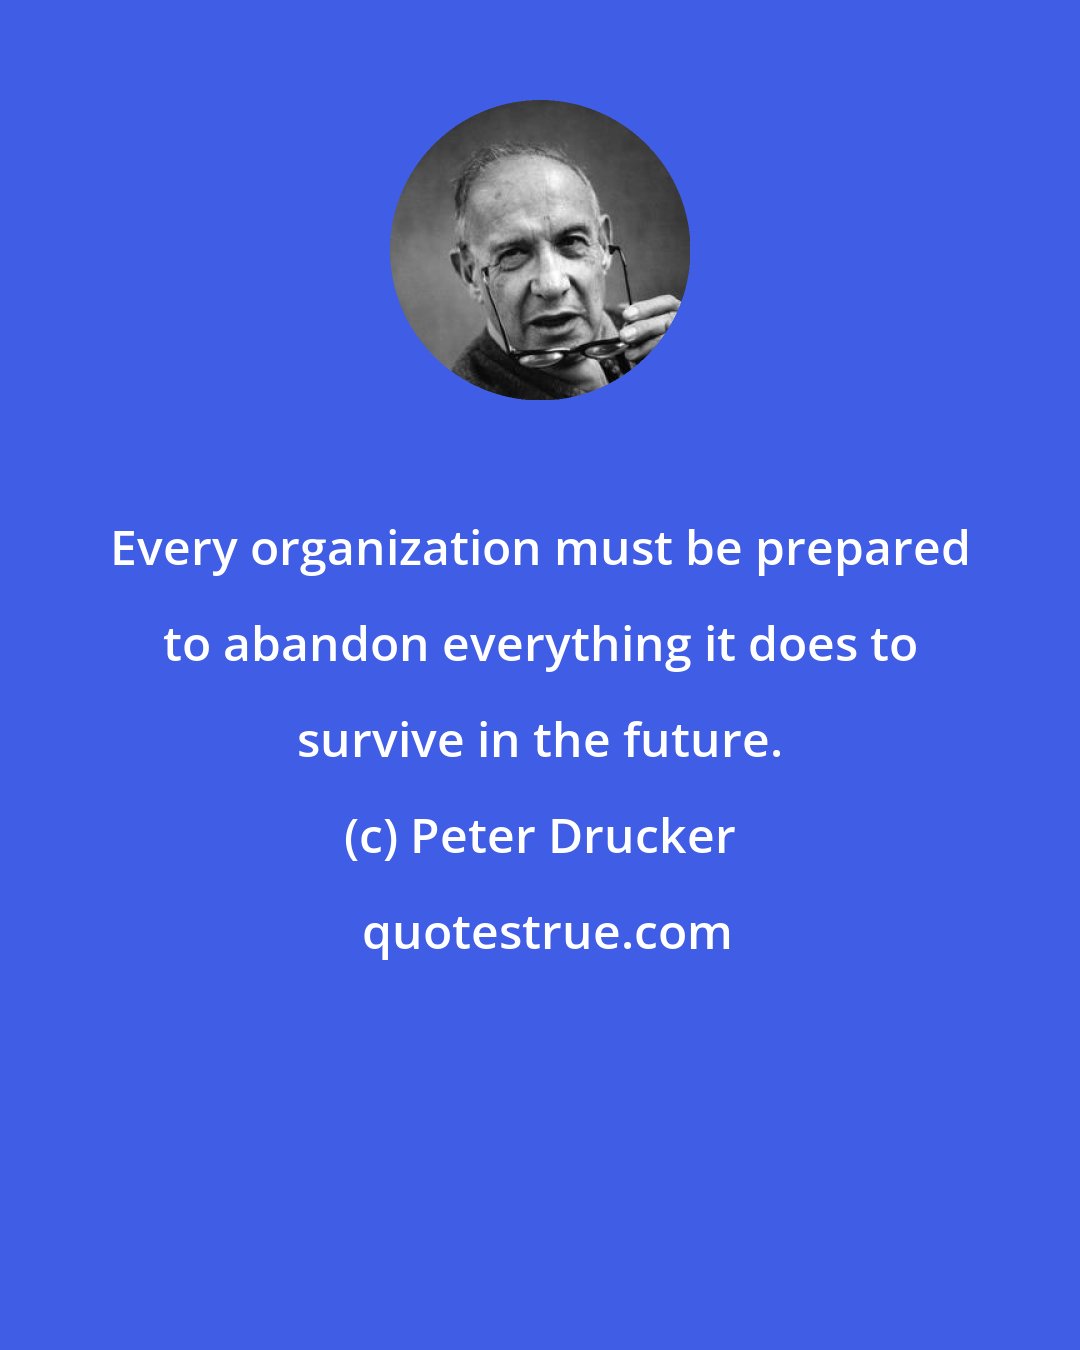 Peter Drucker: Every organization must be prepared to abandon everything it does to survive in the future.